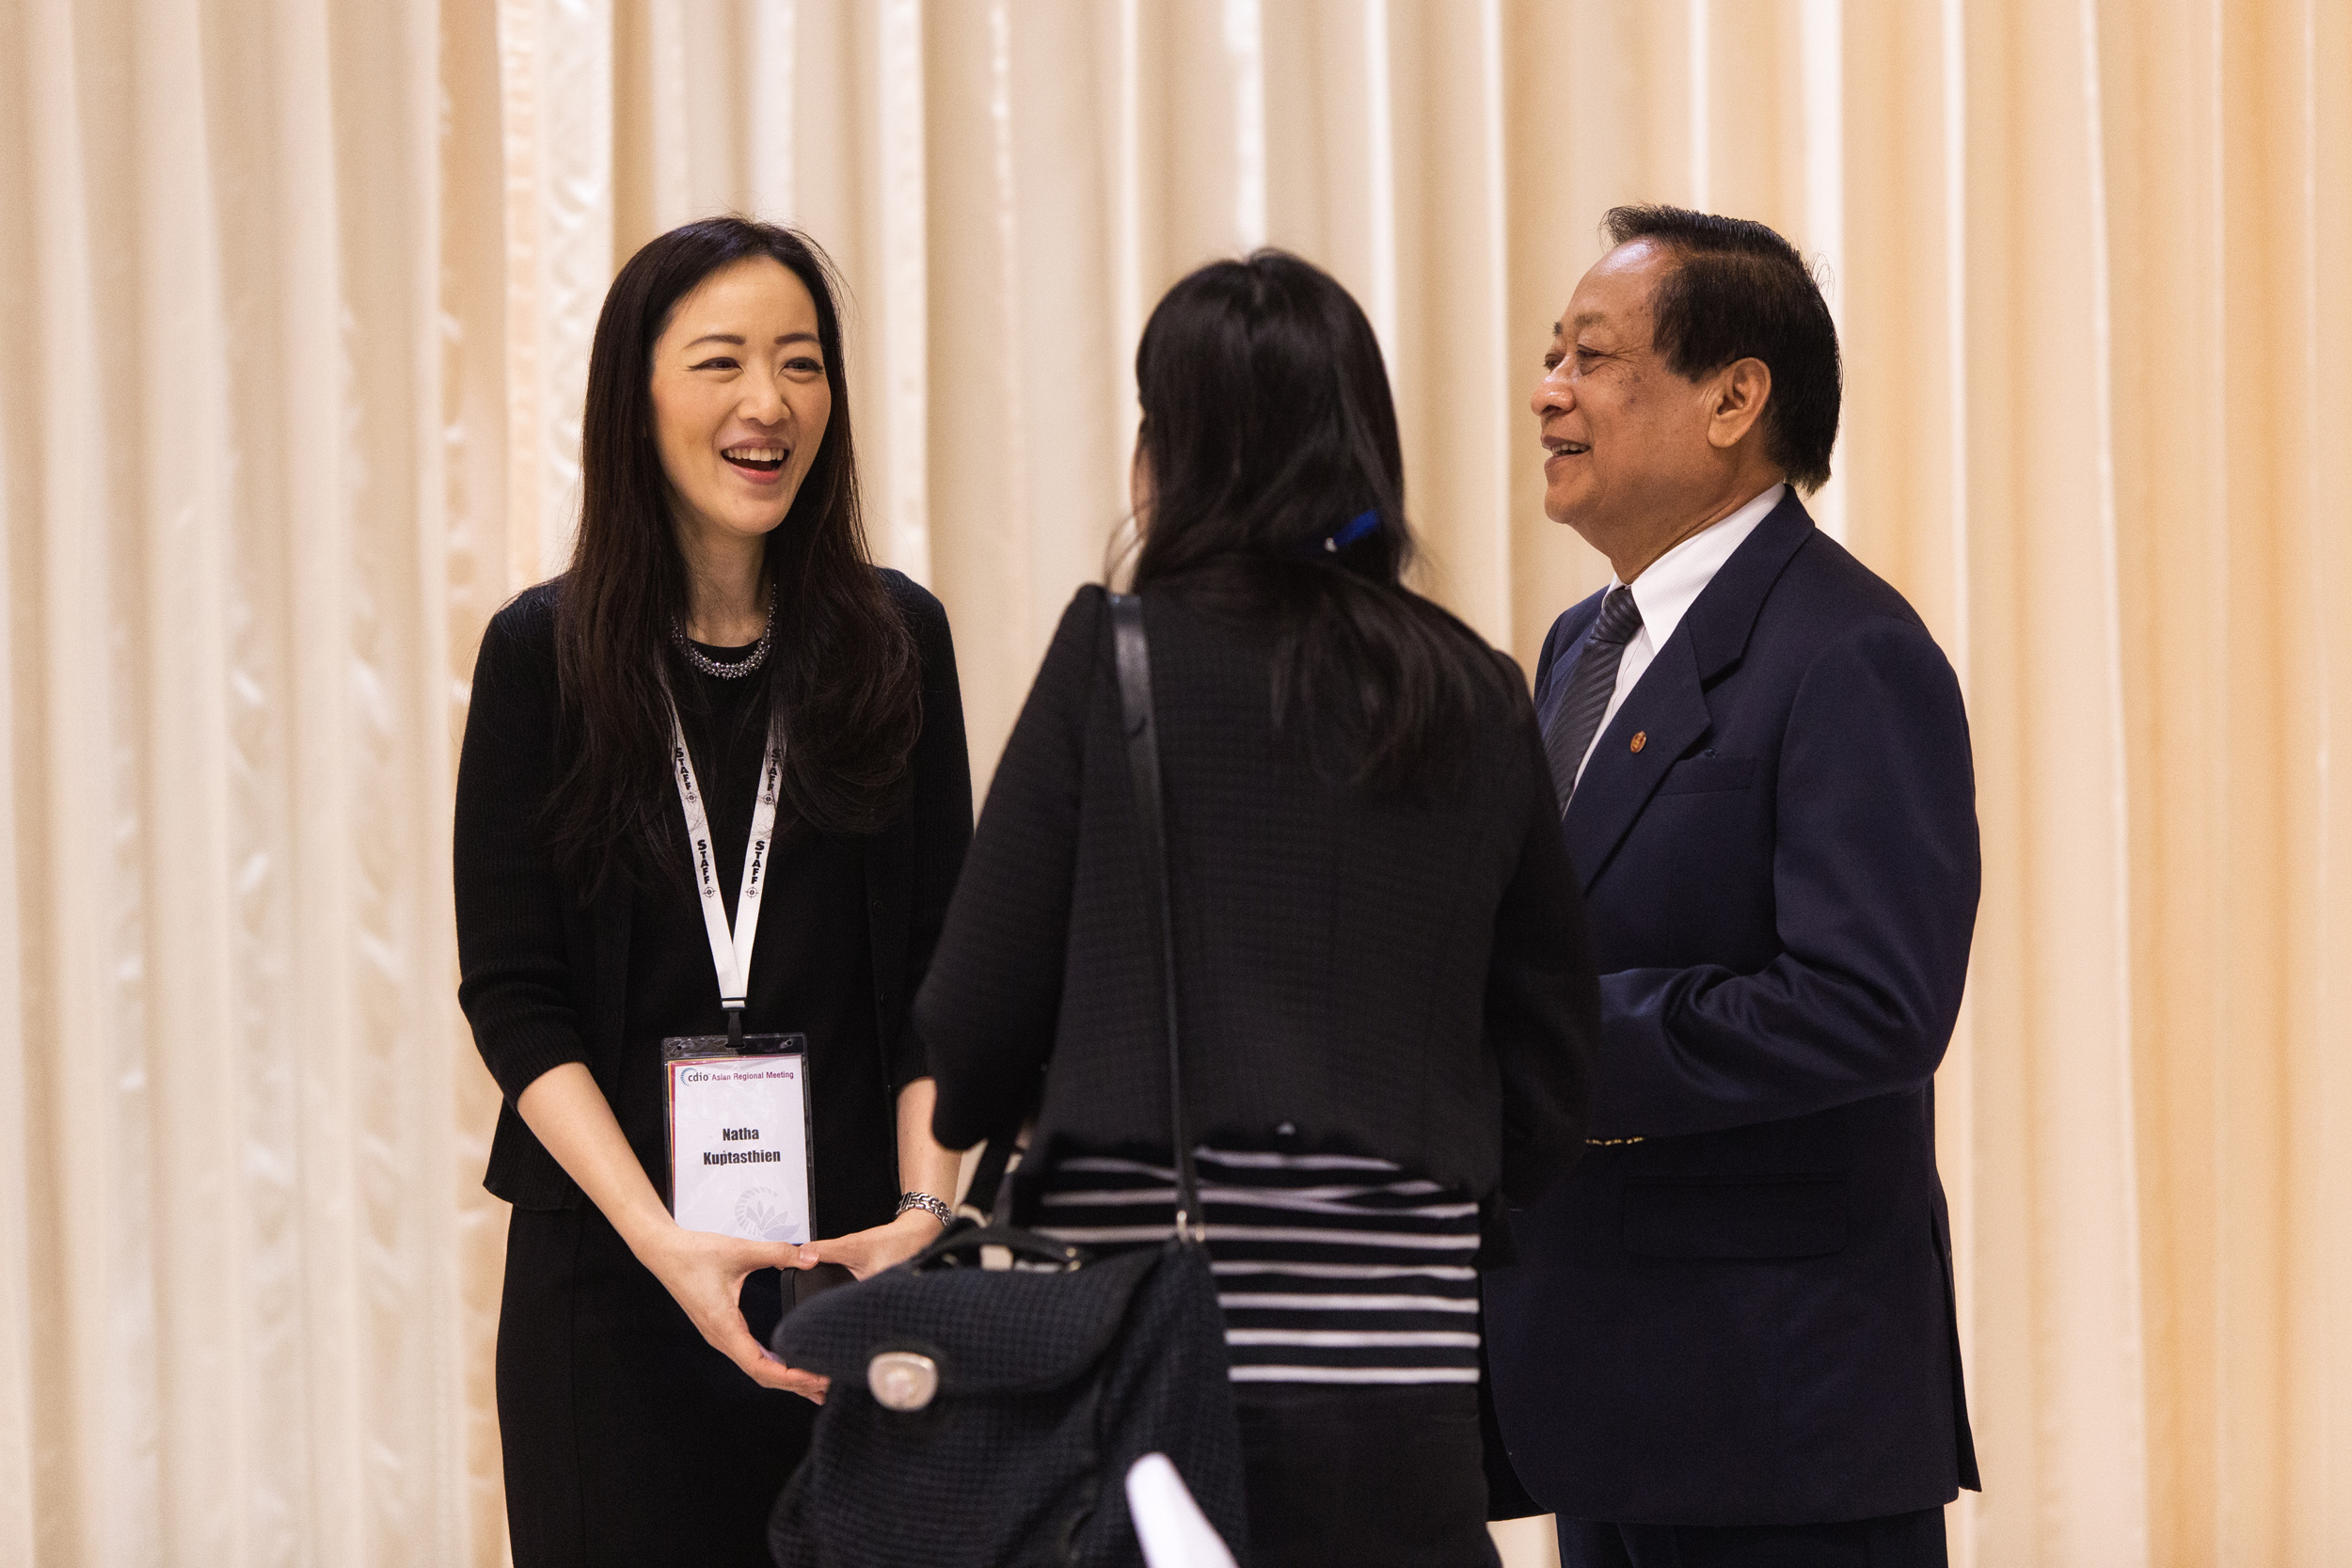  Natha Kuptasthien (left), who leads CDIO in RMUTT, interacts with participants at the 2017 CDIO Asian Regional Meeting. Temasek Foundation International, which supports CDIO in Thailand, is a supporter of the framework because of its focus on addres